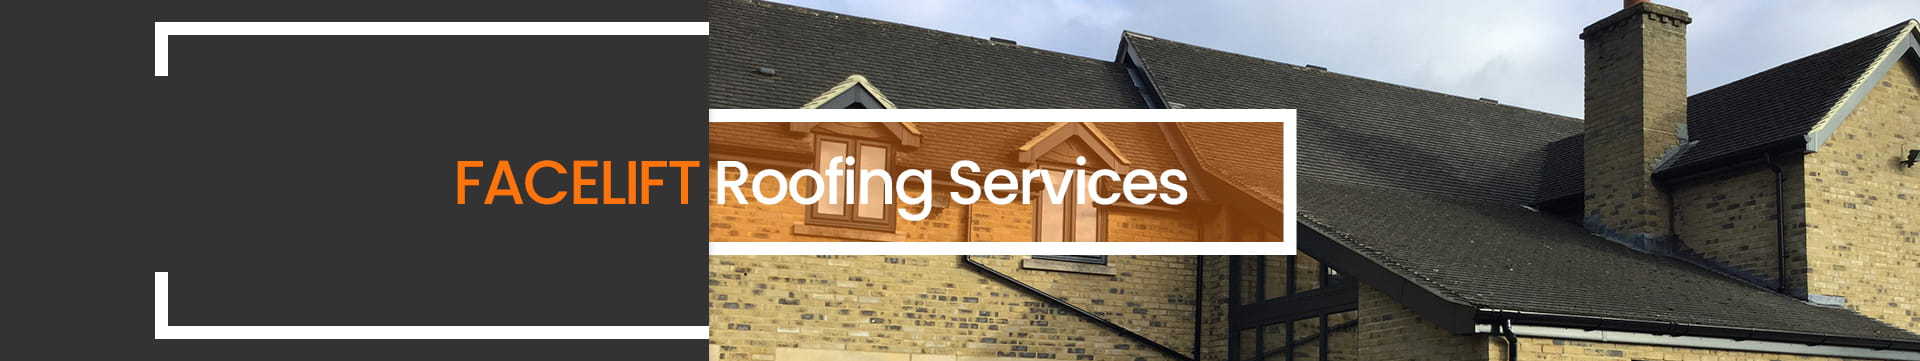 Roofing Services Banner Image - Roofing Services